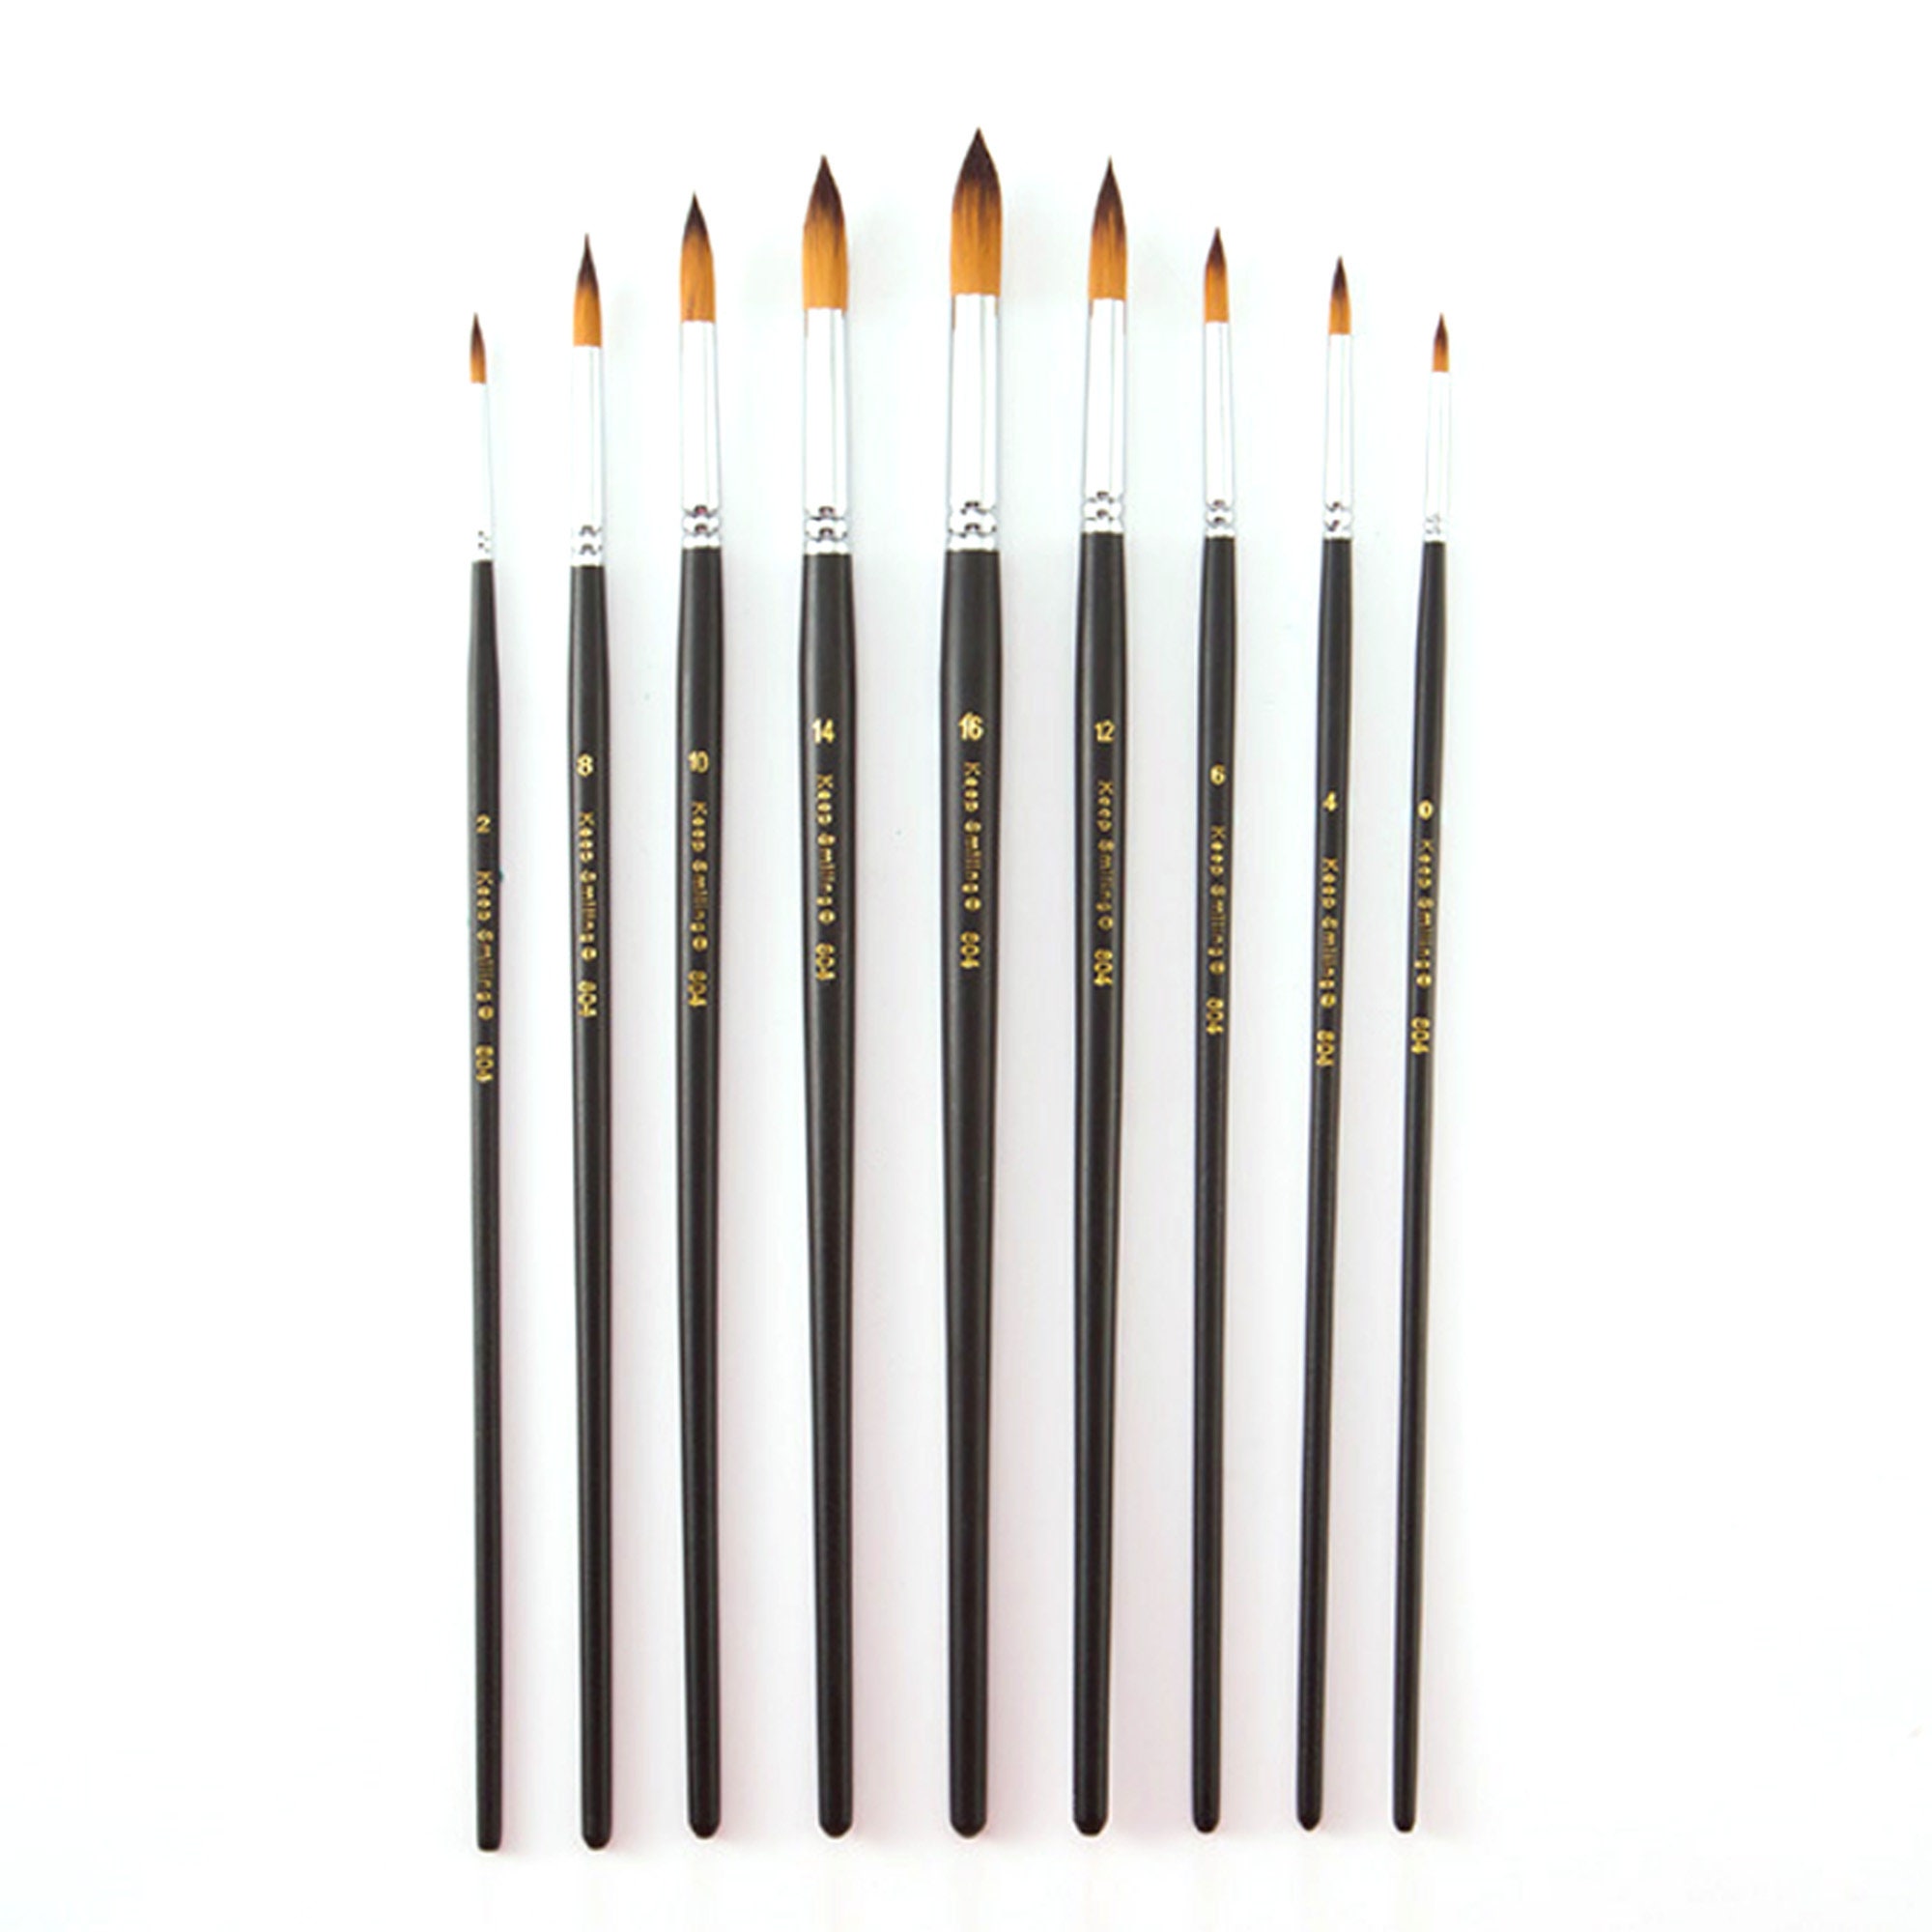 Detail Paint Brushes 9pcs Detail Brush Set For Acrylic, Watercolor, Oil,  Models, Nails Tiny Paint Brushes With Triangle Grip Handles